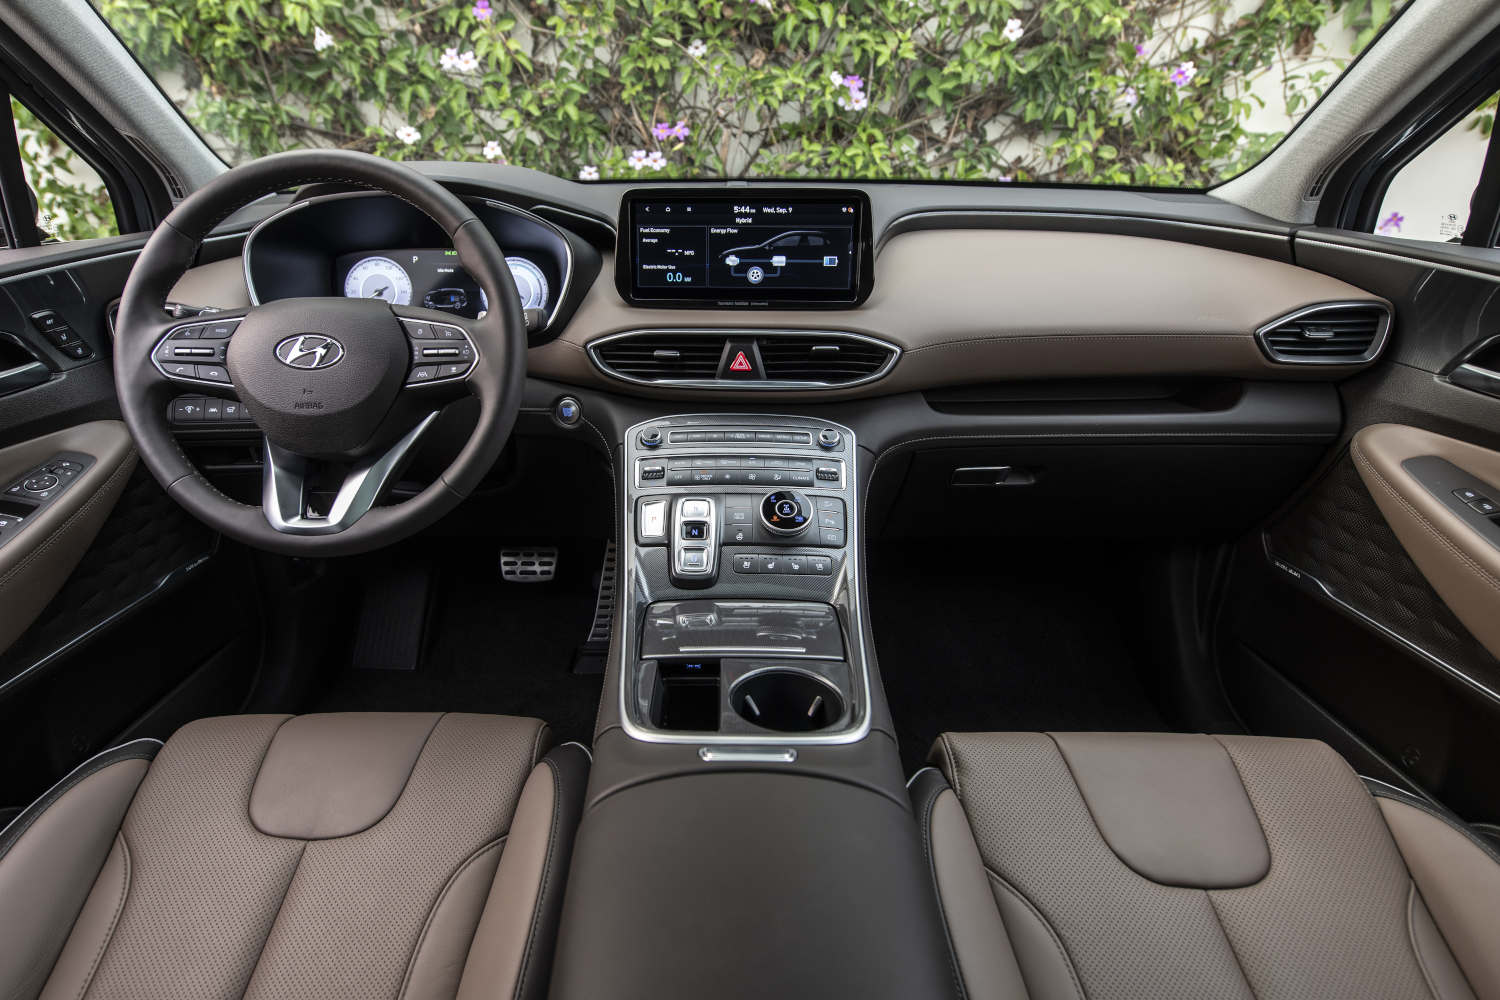 Inside the Hyundai Santa Fe, the best SUV for the money in 2023